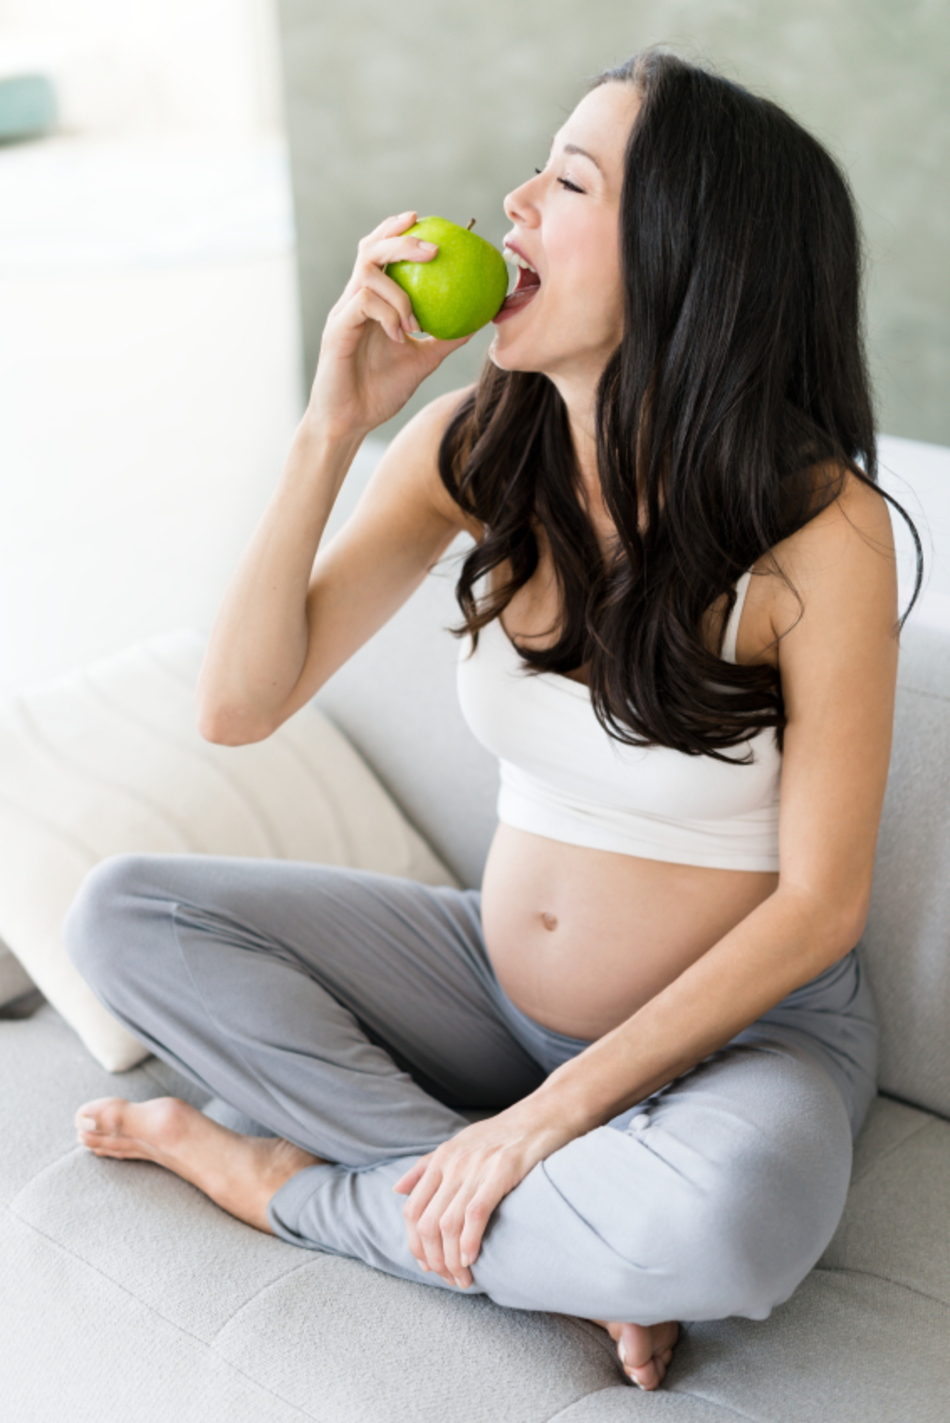 Rethinking How Much Weight to Gain During Pregnancy